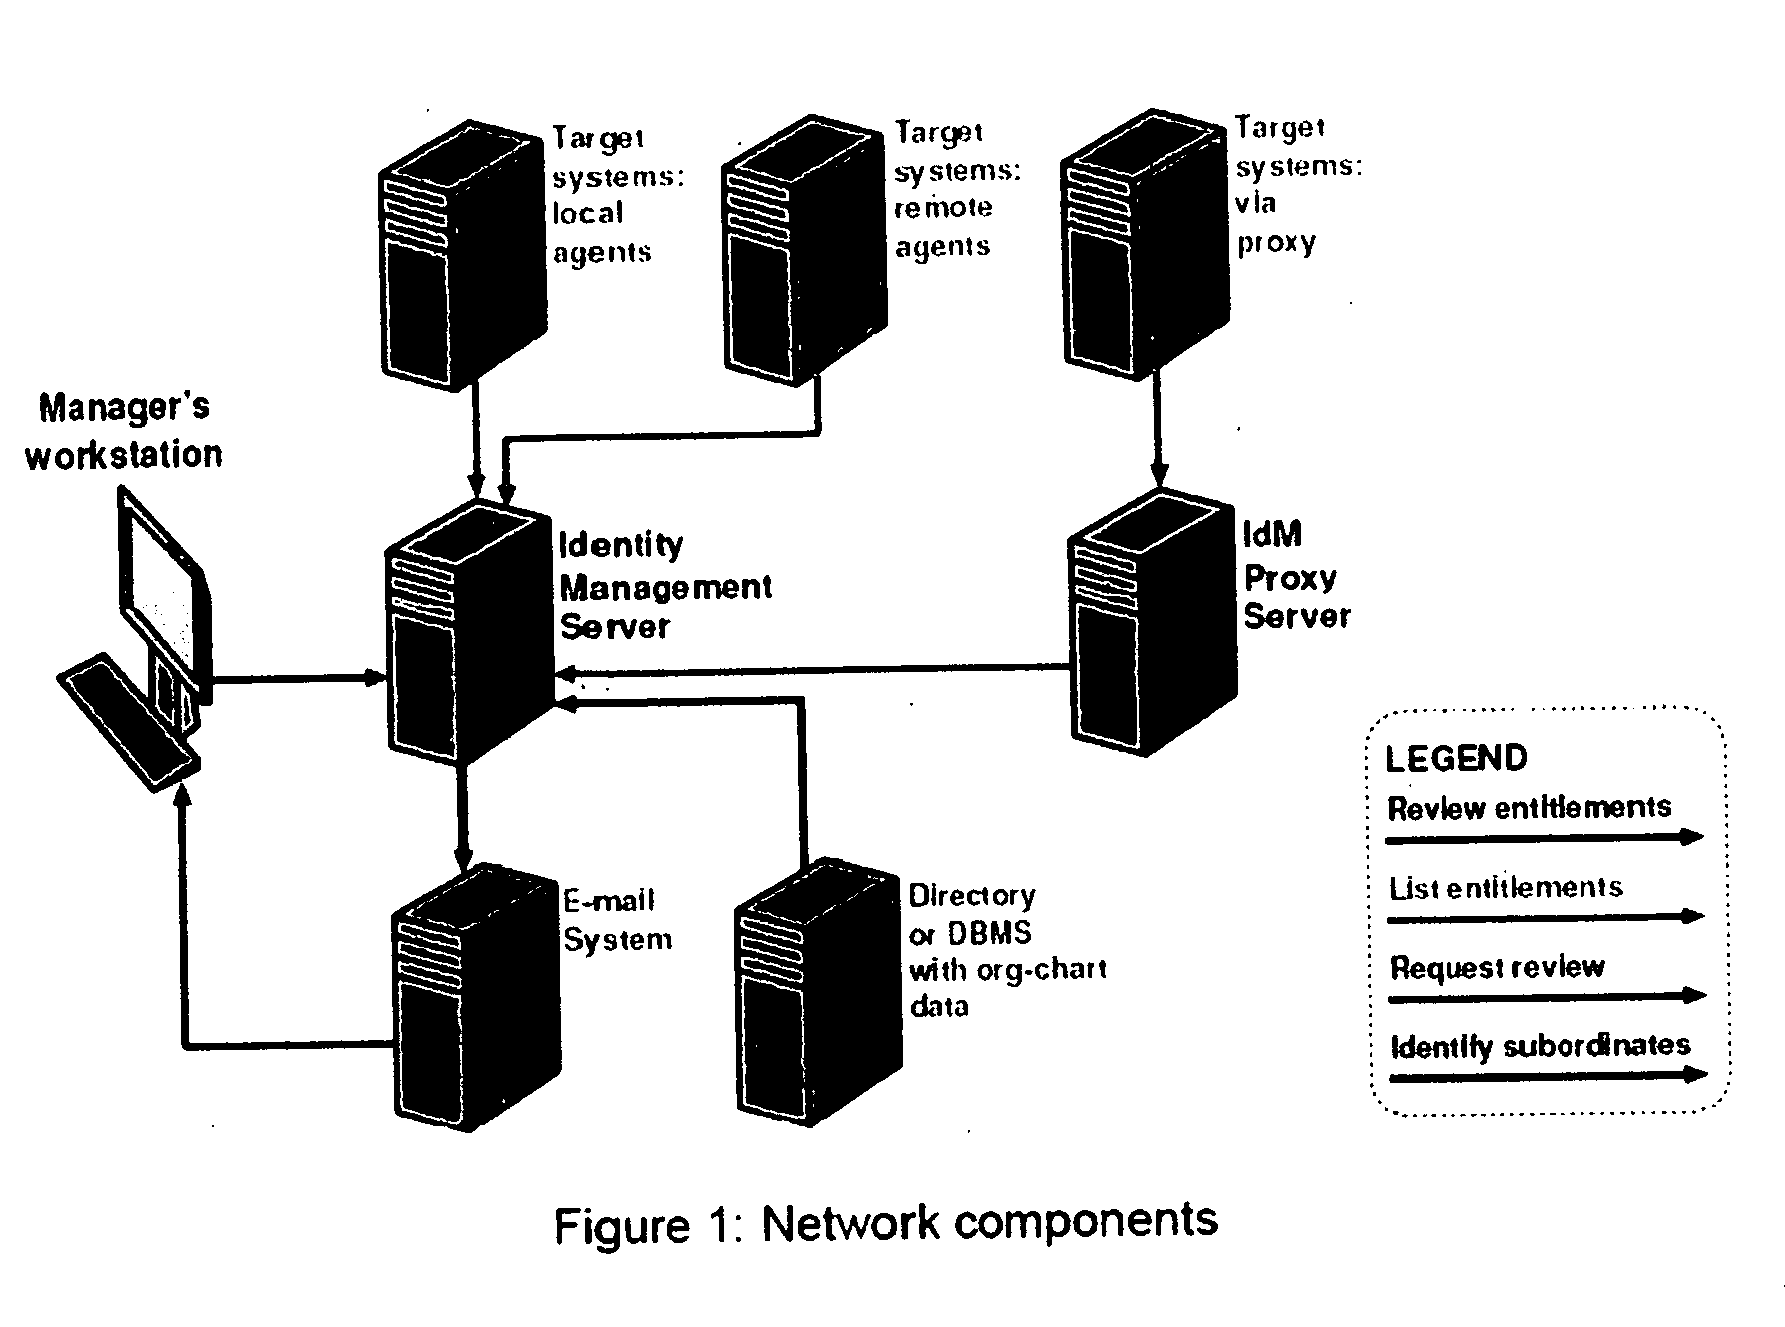 Process for removing stale users, accounts and entitlements from a networked computer environment